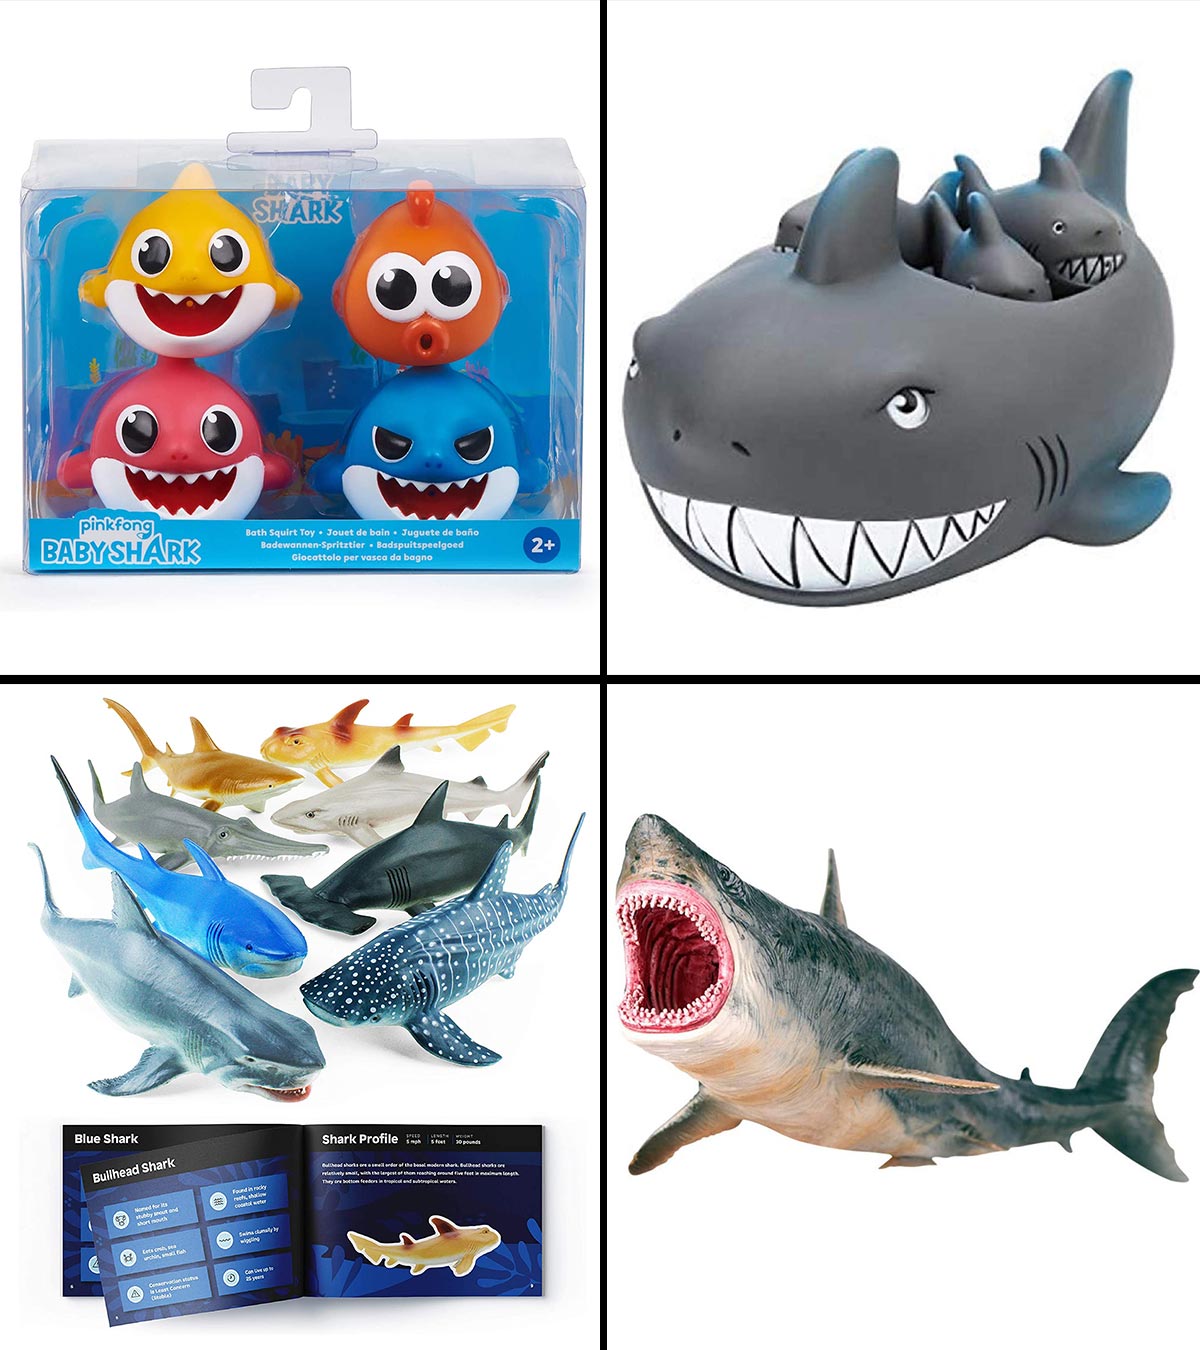 New Upgraded Remote Control Shark Toys Pool Toys Outdoor Toys for